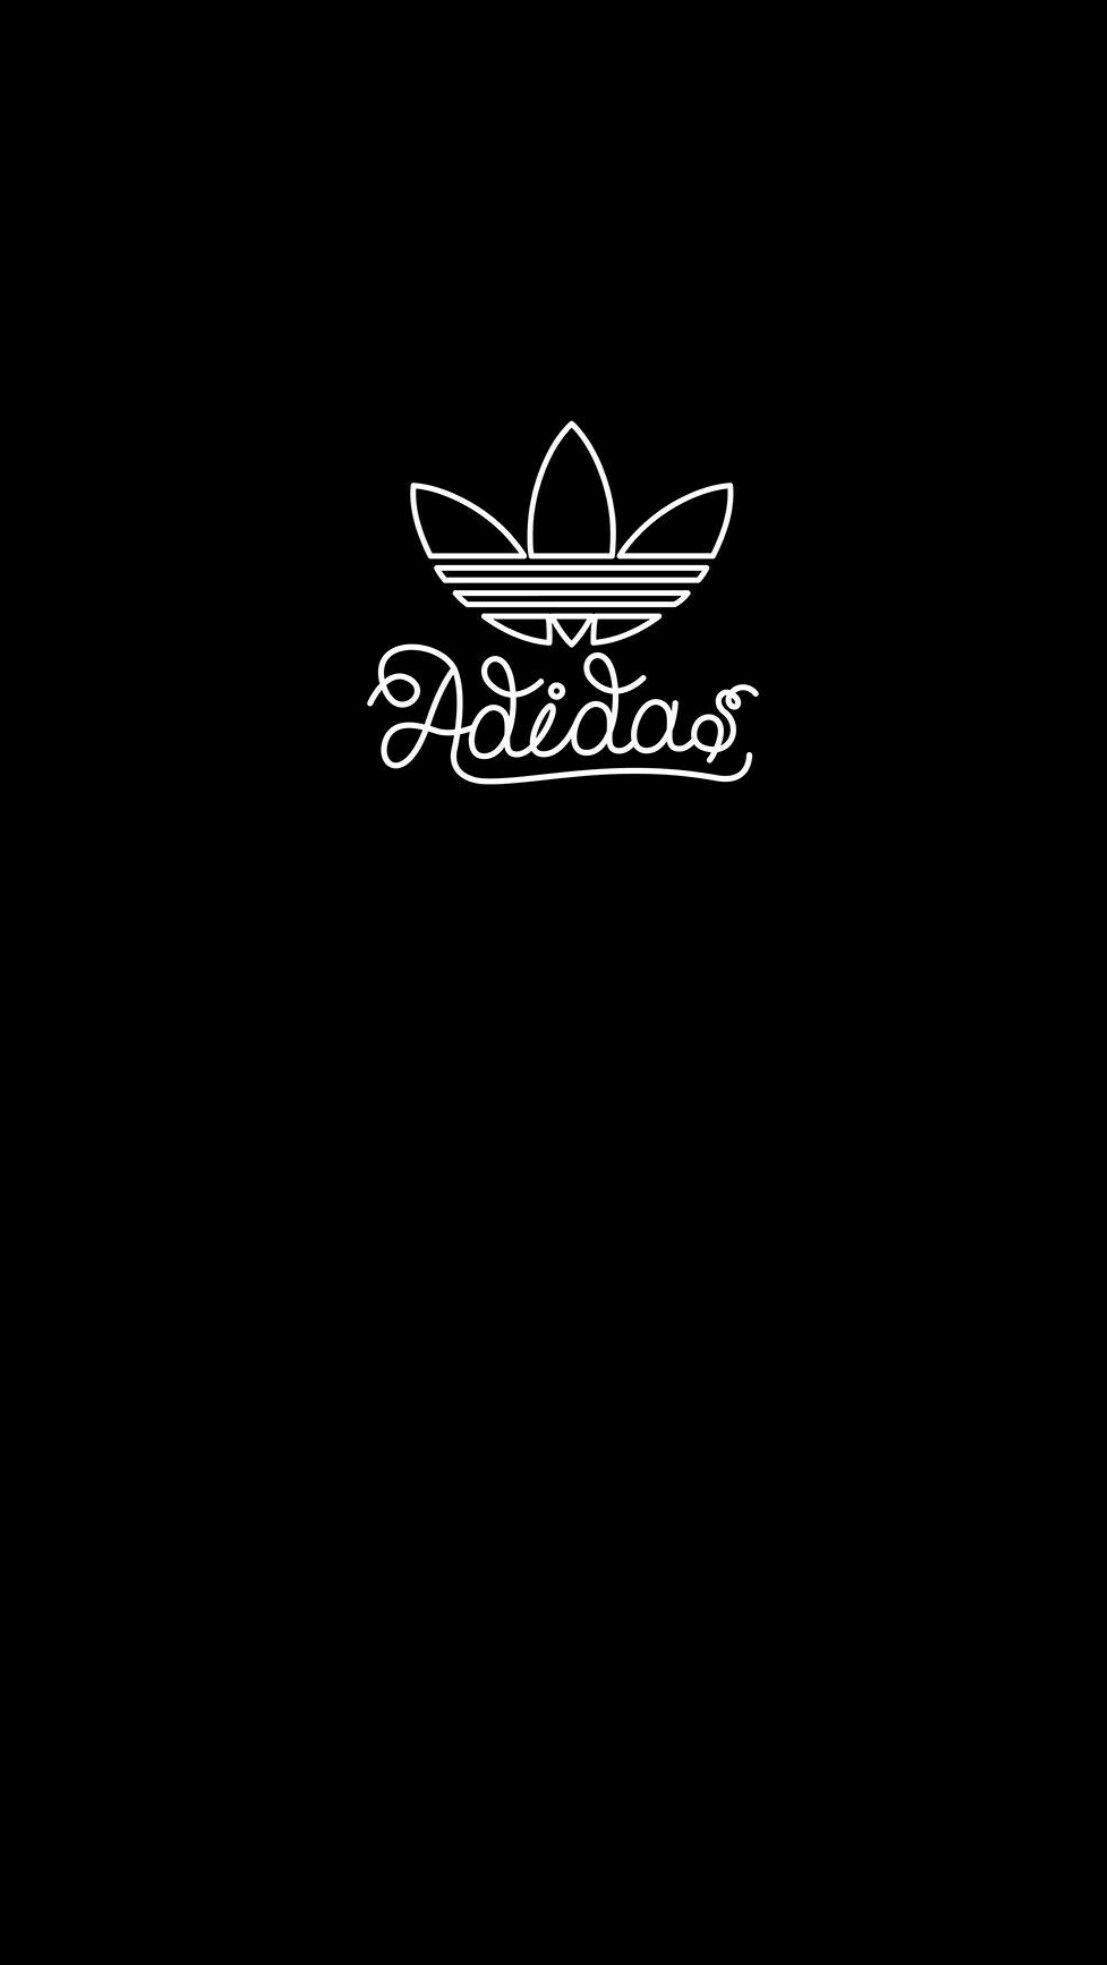 Adidas Hd Android Wallpapers Wallpaper Cave